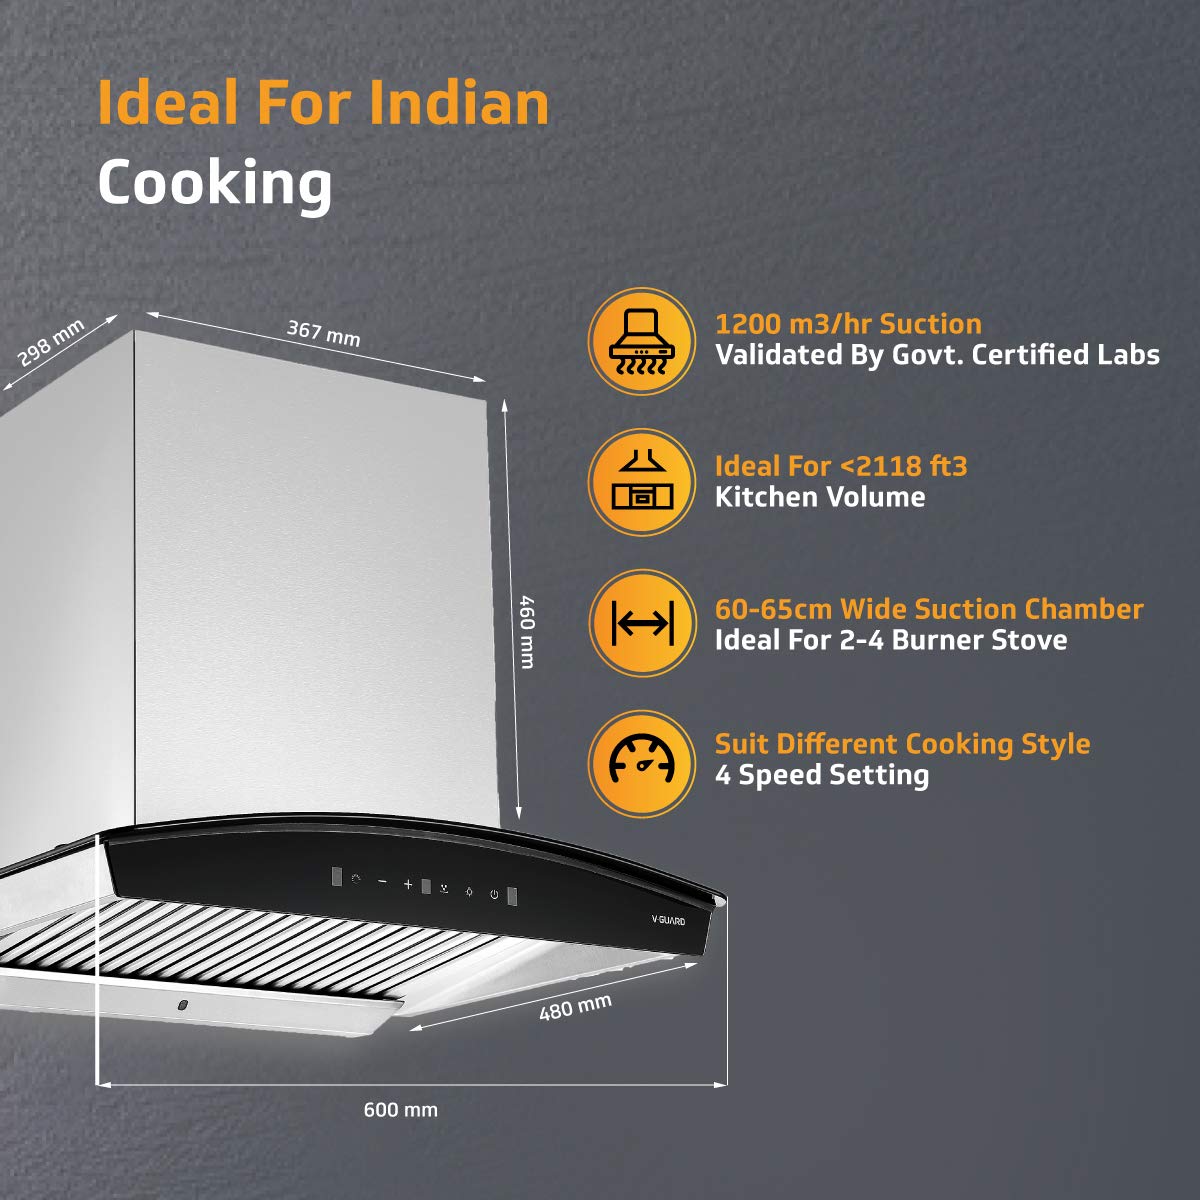 A10 60cm Kitchen Chimney 1400 cmh Suction with Baffle Filter (Auto Clean, Motion Sensor)